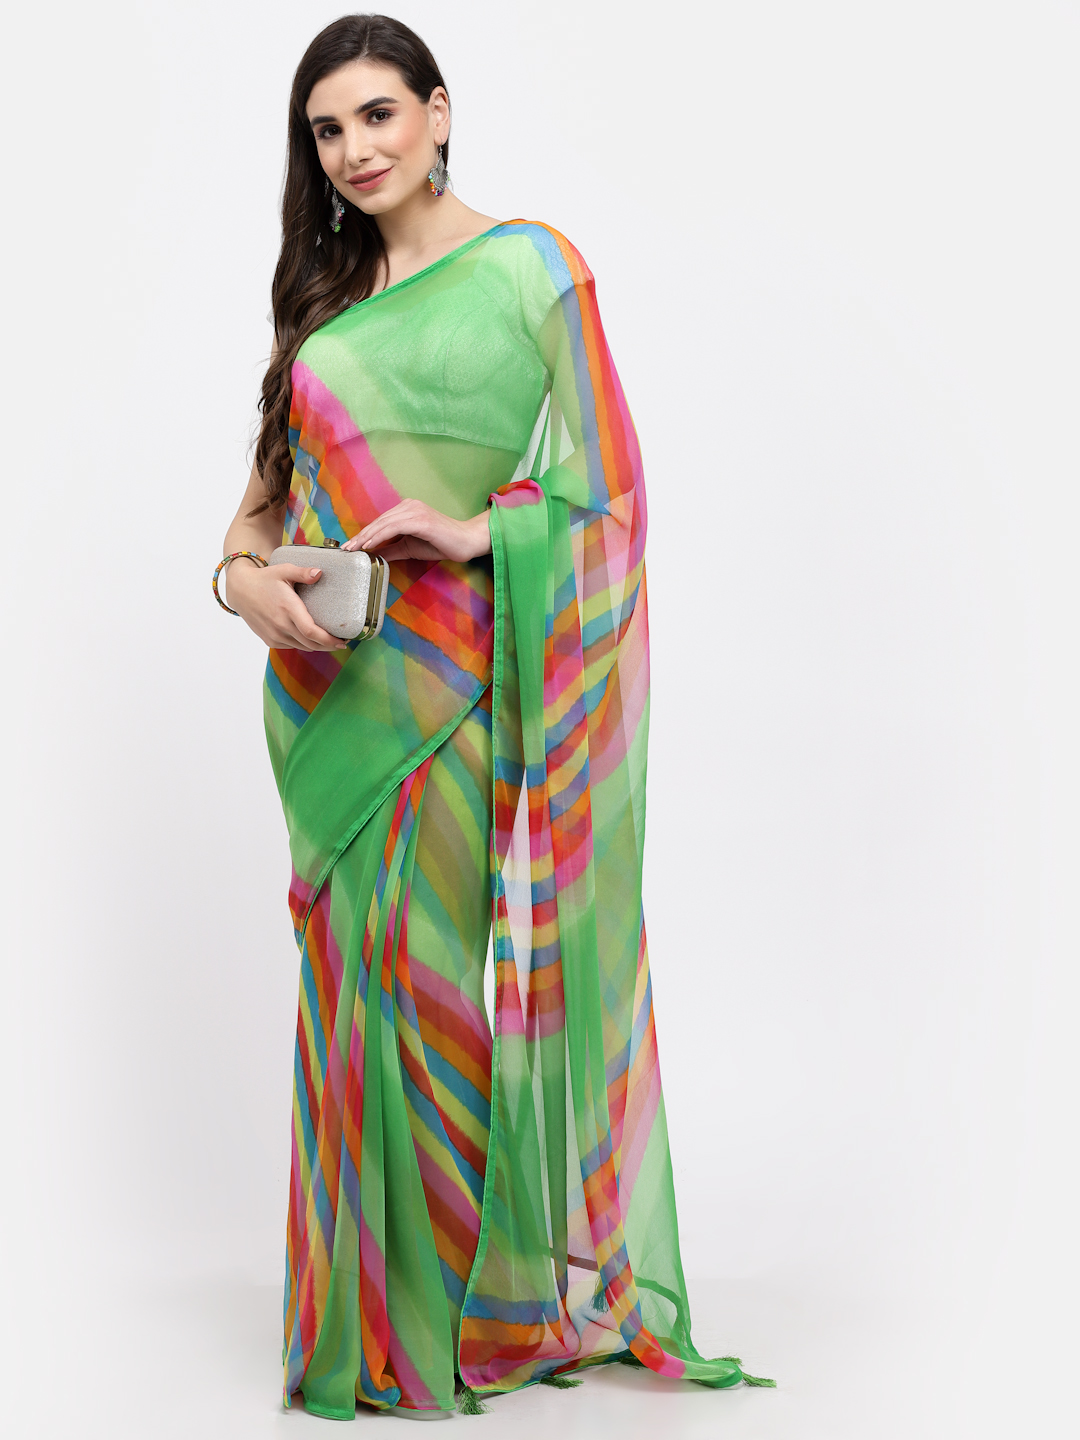 Women Lehariya Chiffon Saree And Blouse Multicolor with Unstitched